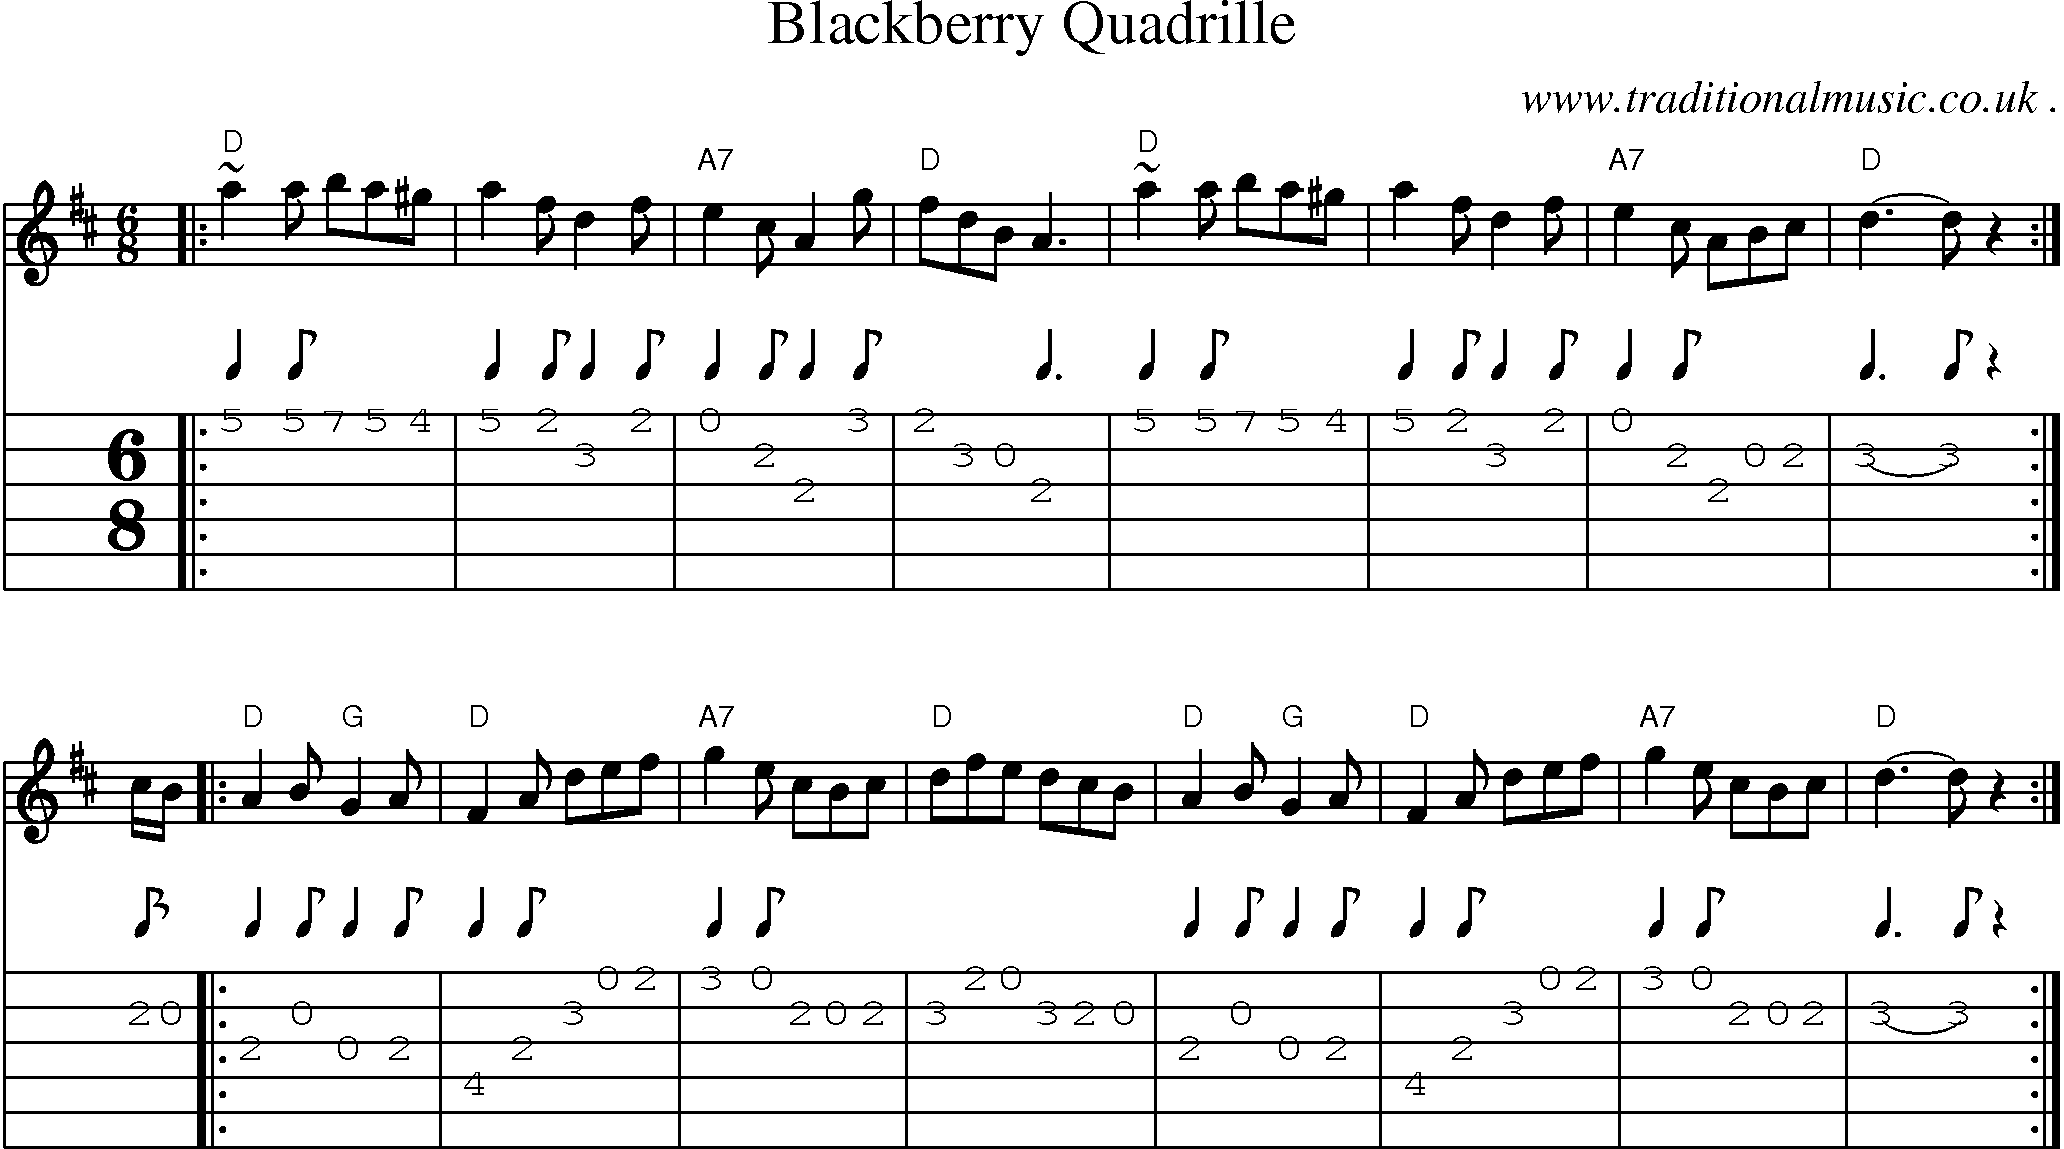 Sheet-music  score, Chords and Guitar Tabs for Blackberry Quadrille